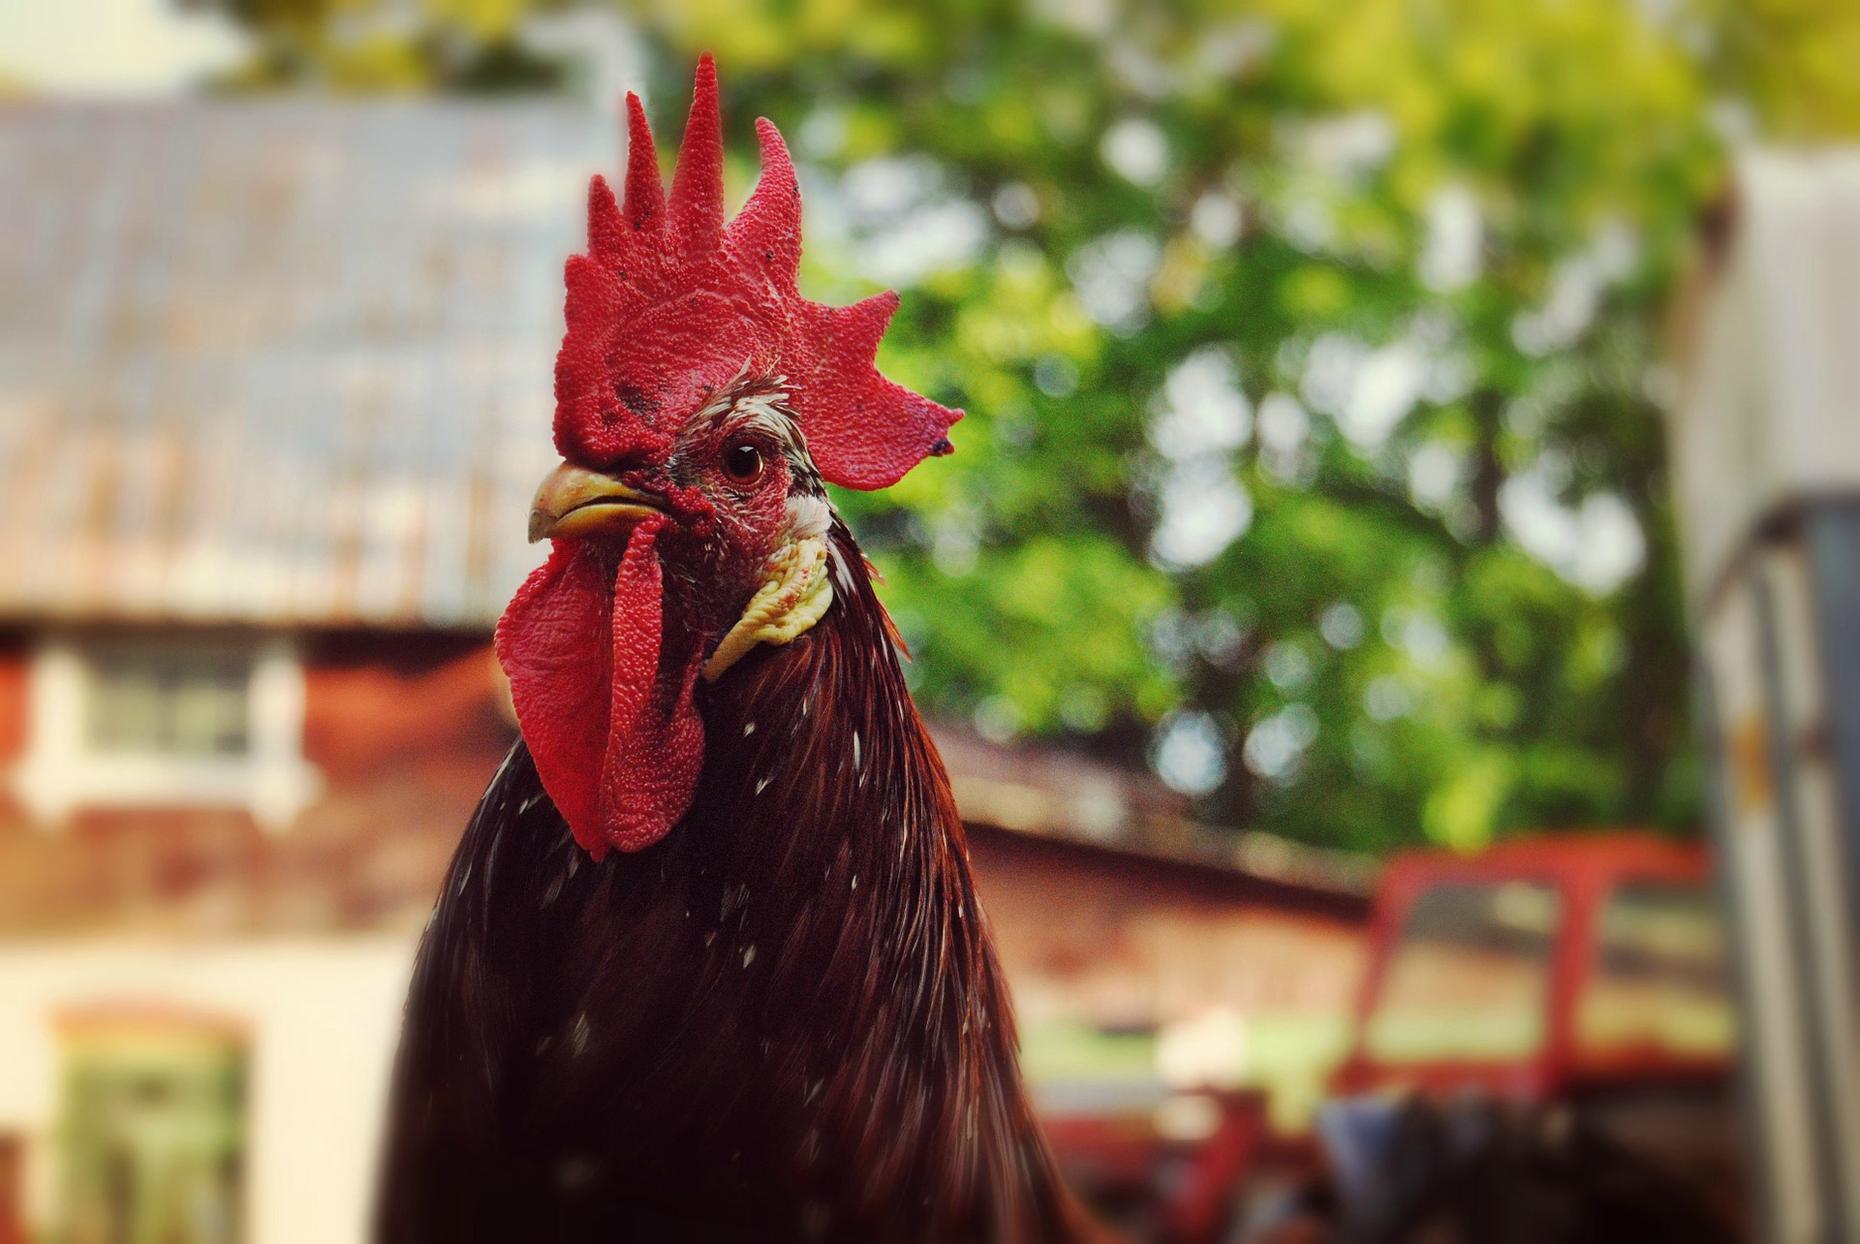 Celebrate the New Year with Songbook songs and facts about Rooster...